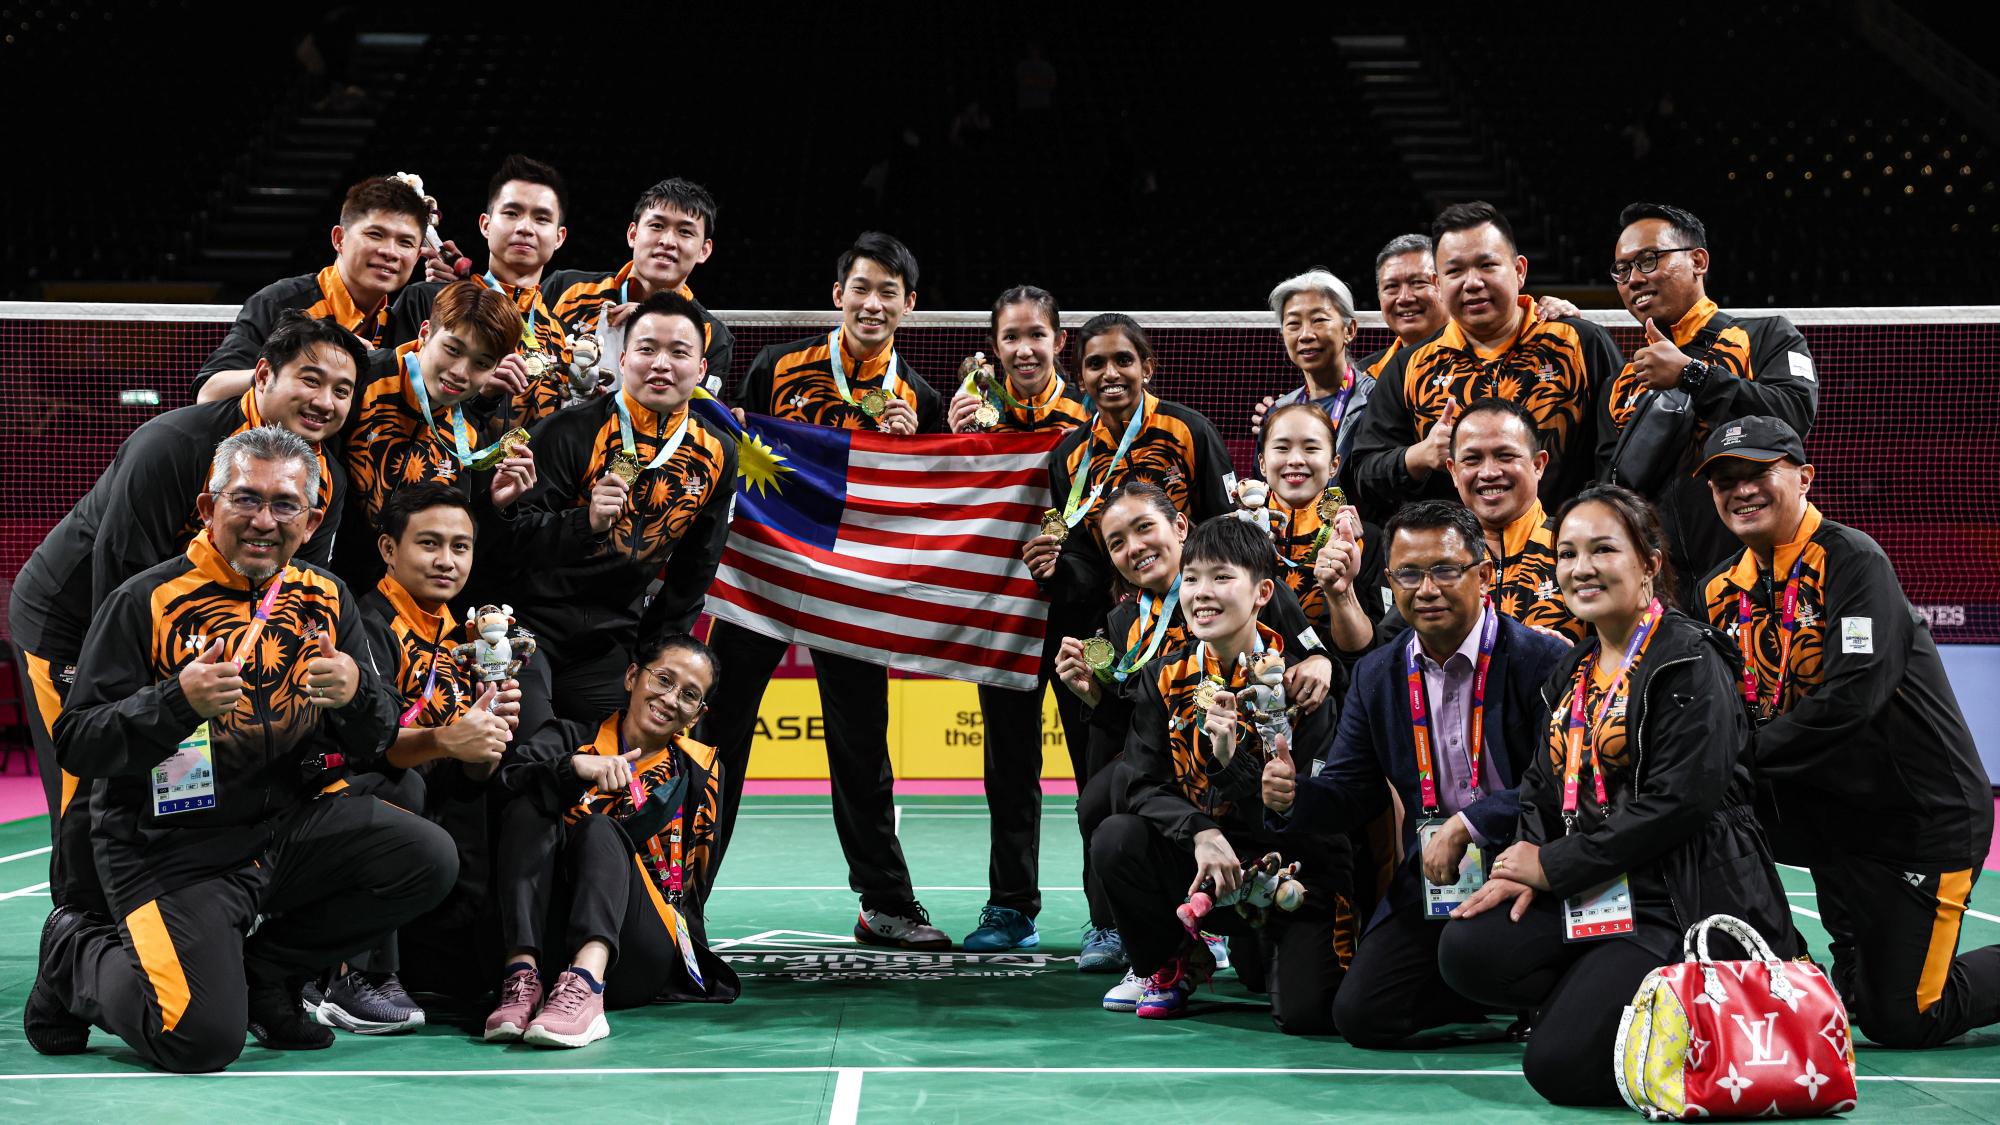 Mixed team glory for Malaysia after thrilling final in Birmingham All England Badminton